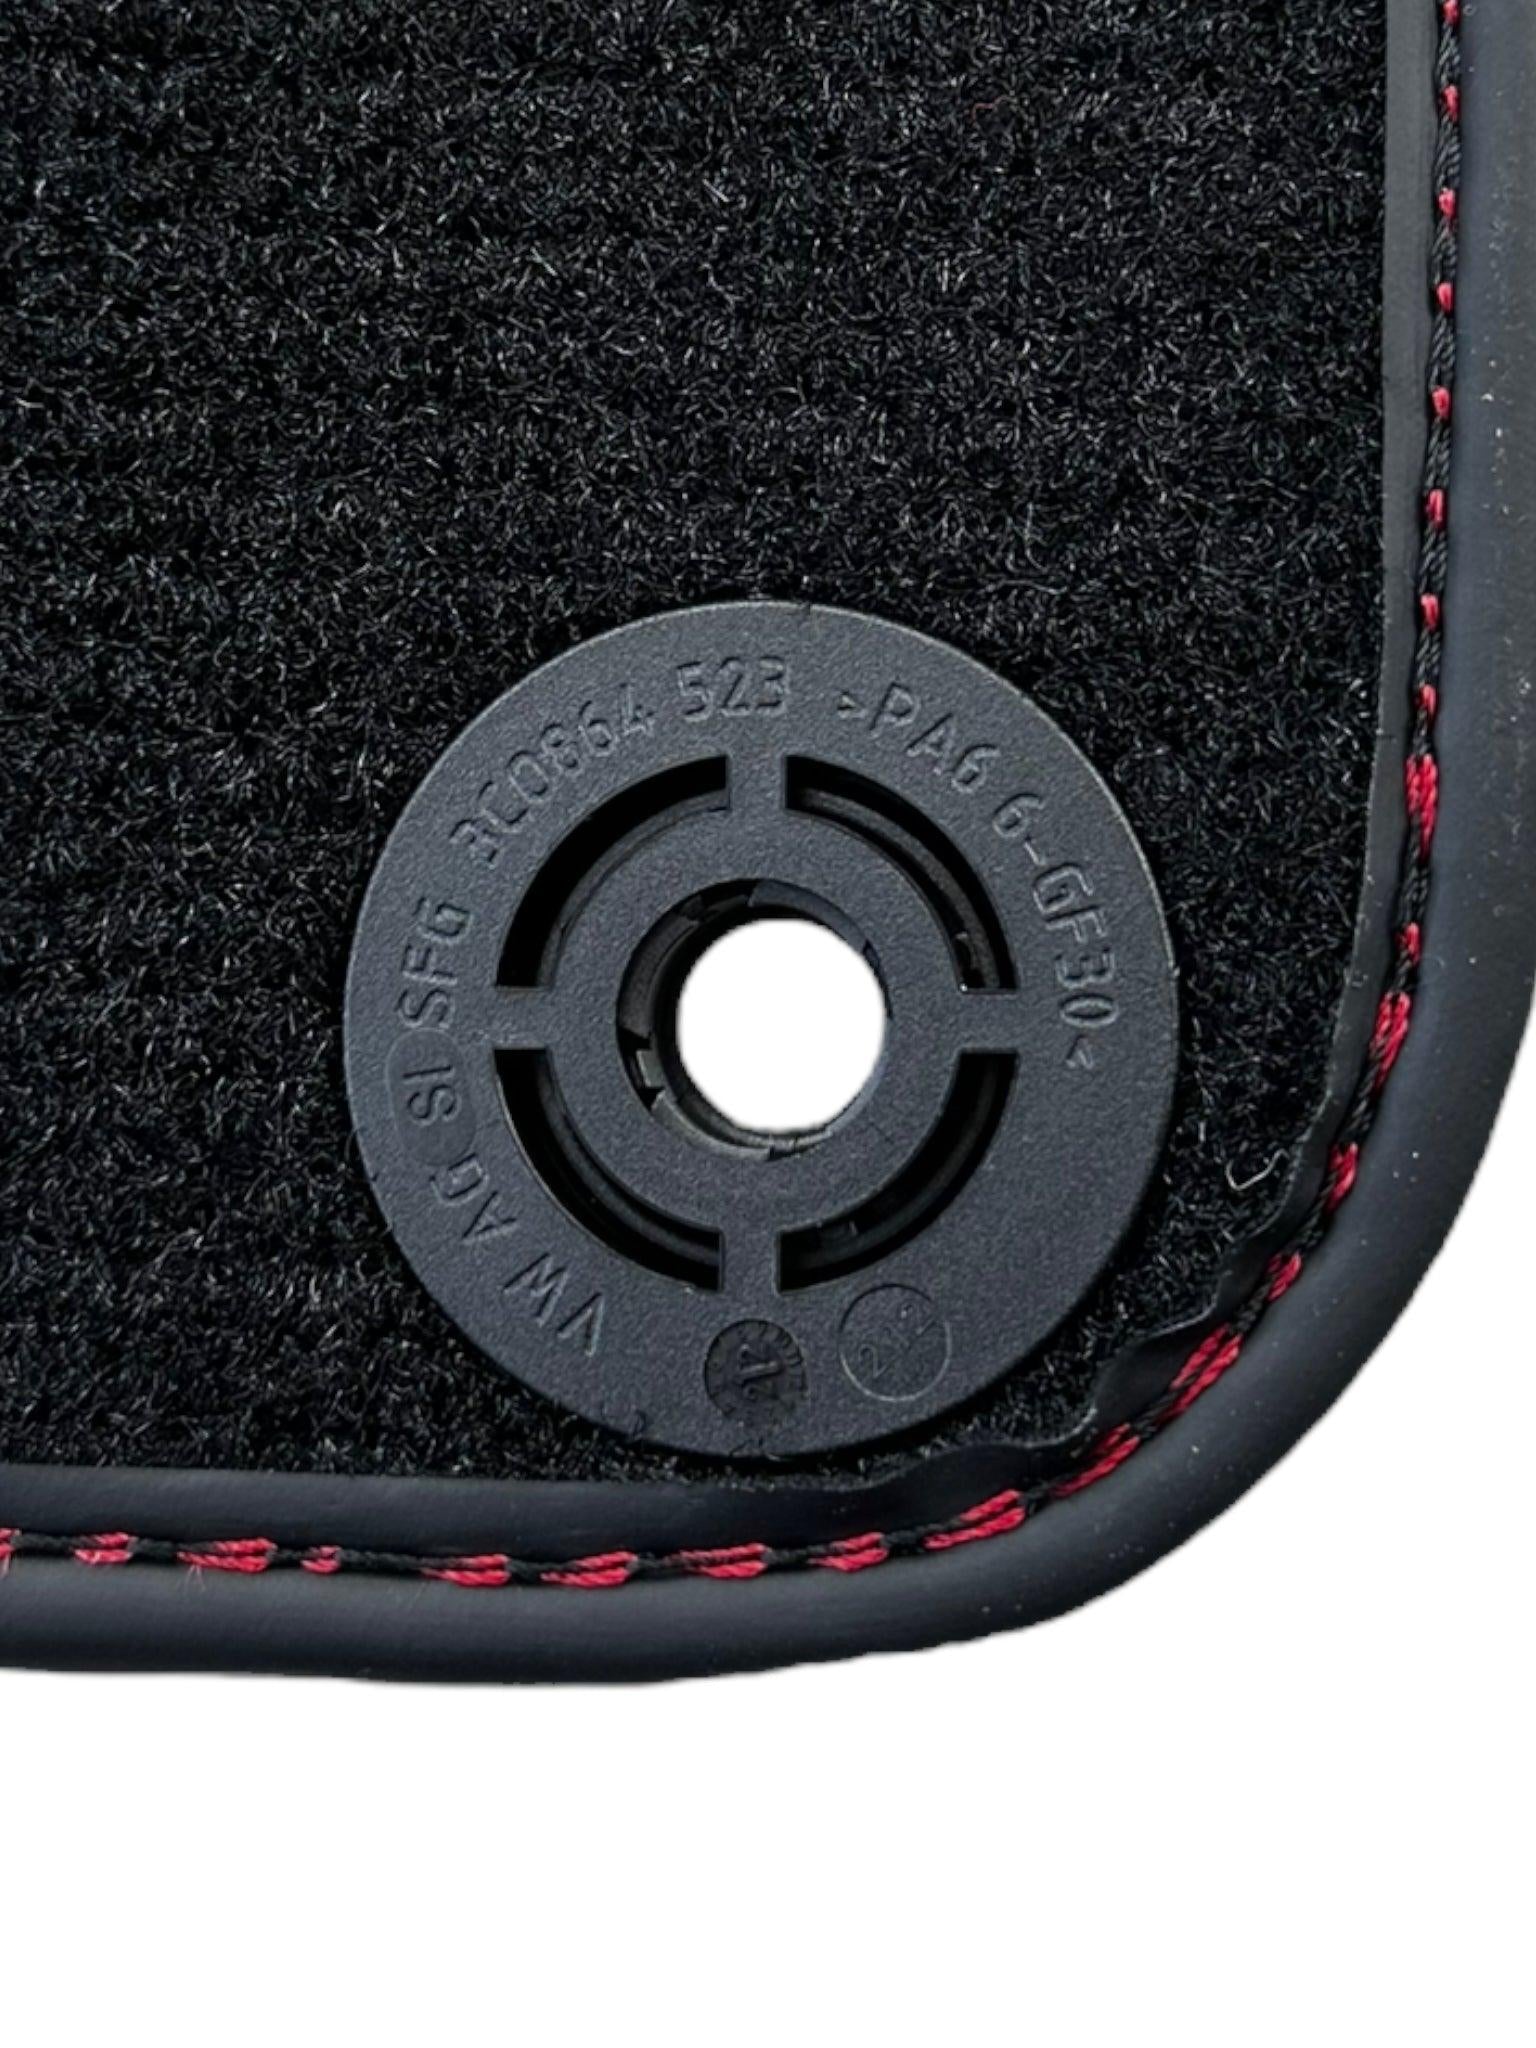 Black Floor Mats for Lamborghini Huracan With Red Leather - AutoWin